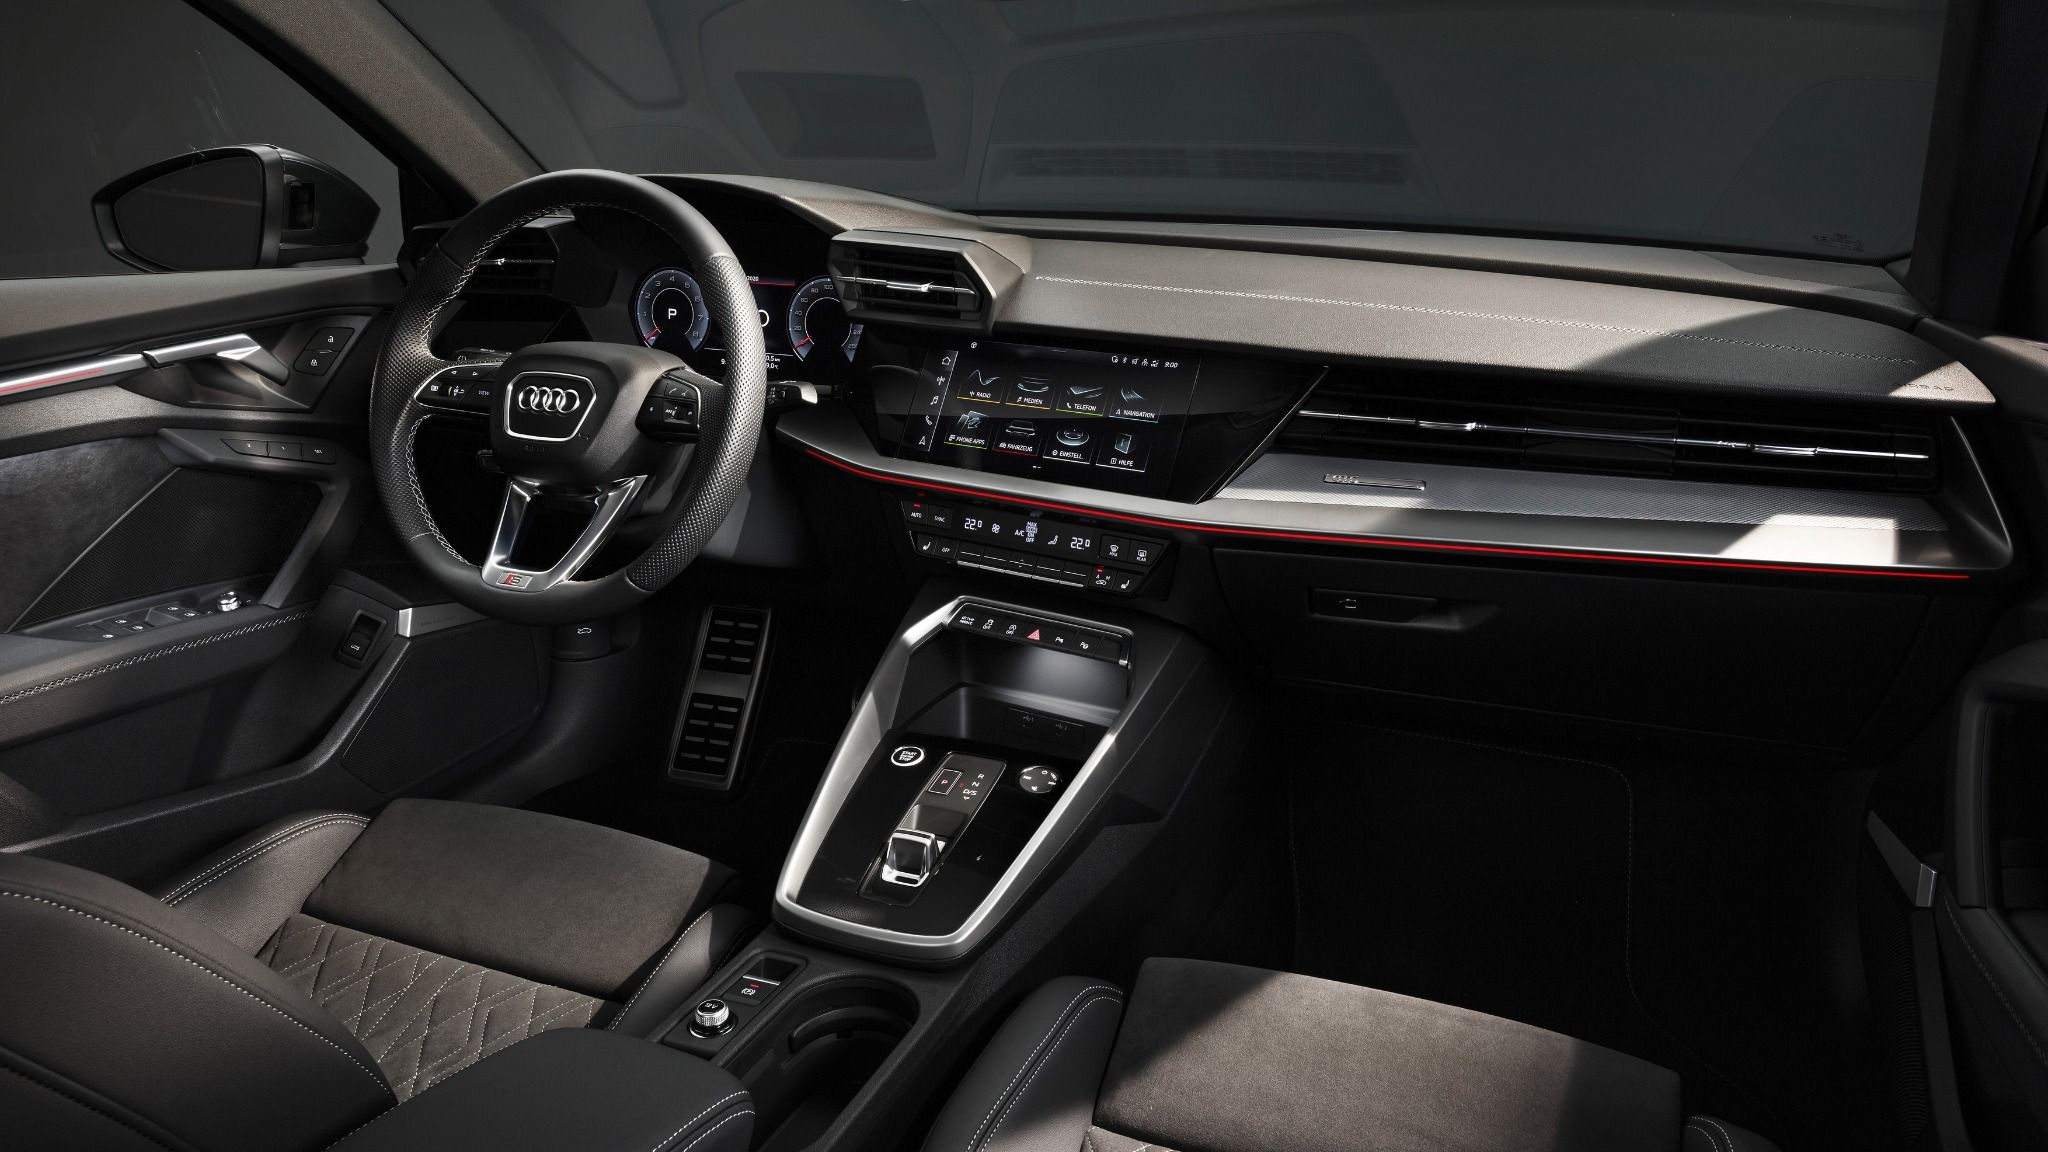 Interior of an audi a3 saloon